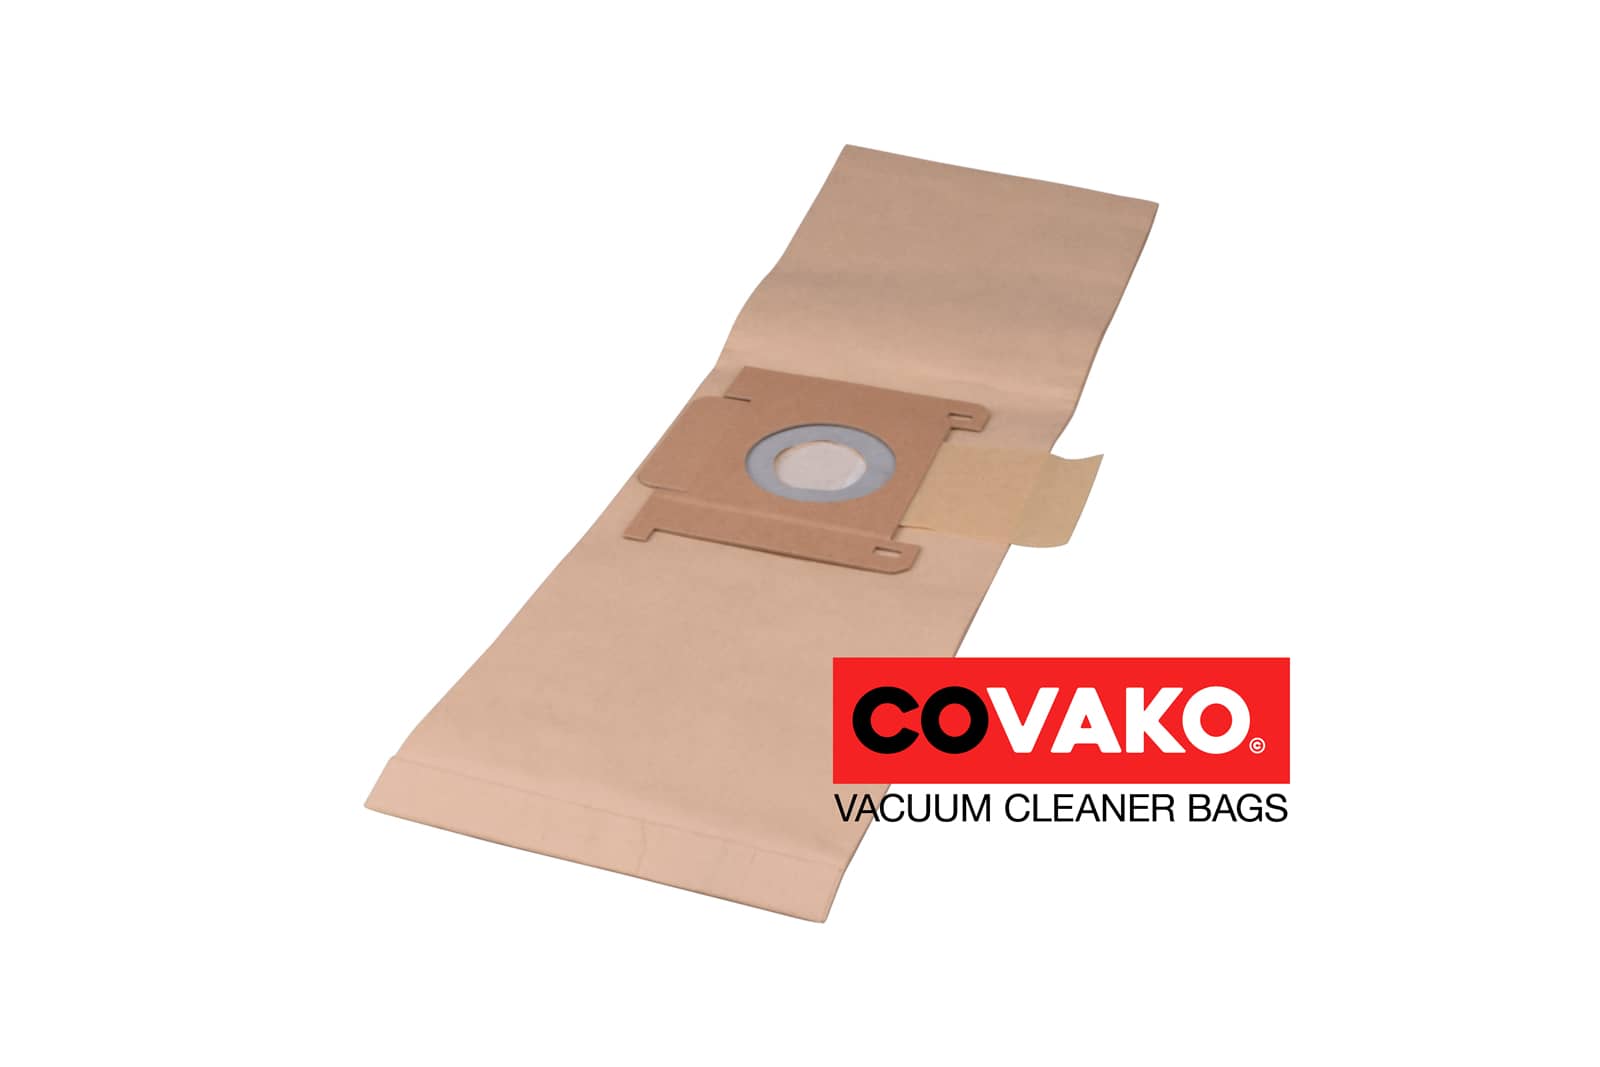 Oehme Otto Compacto 6 / Paper - Oehme Otto vacuum cleaner bags